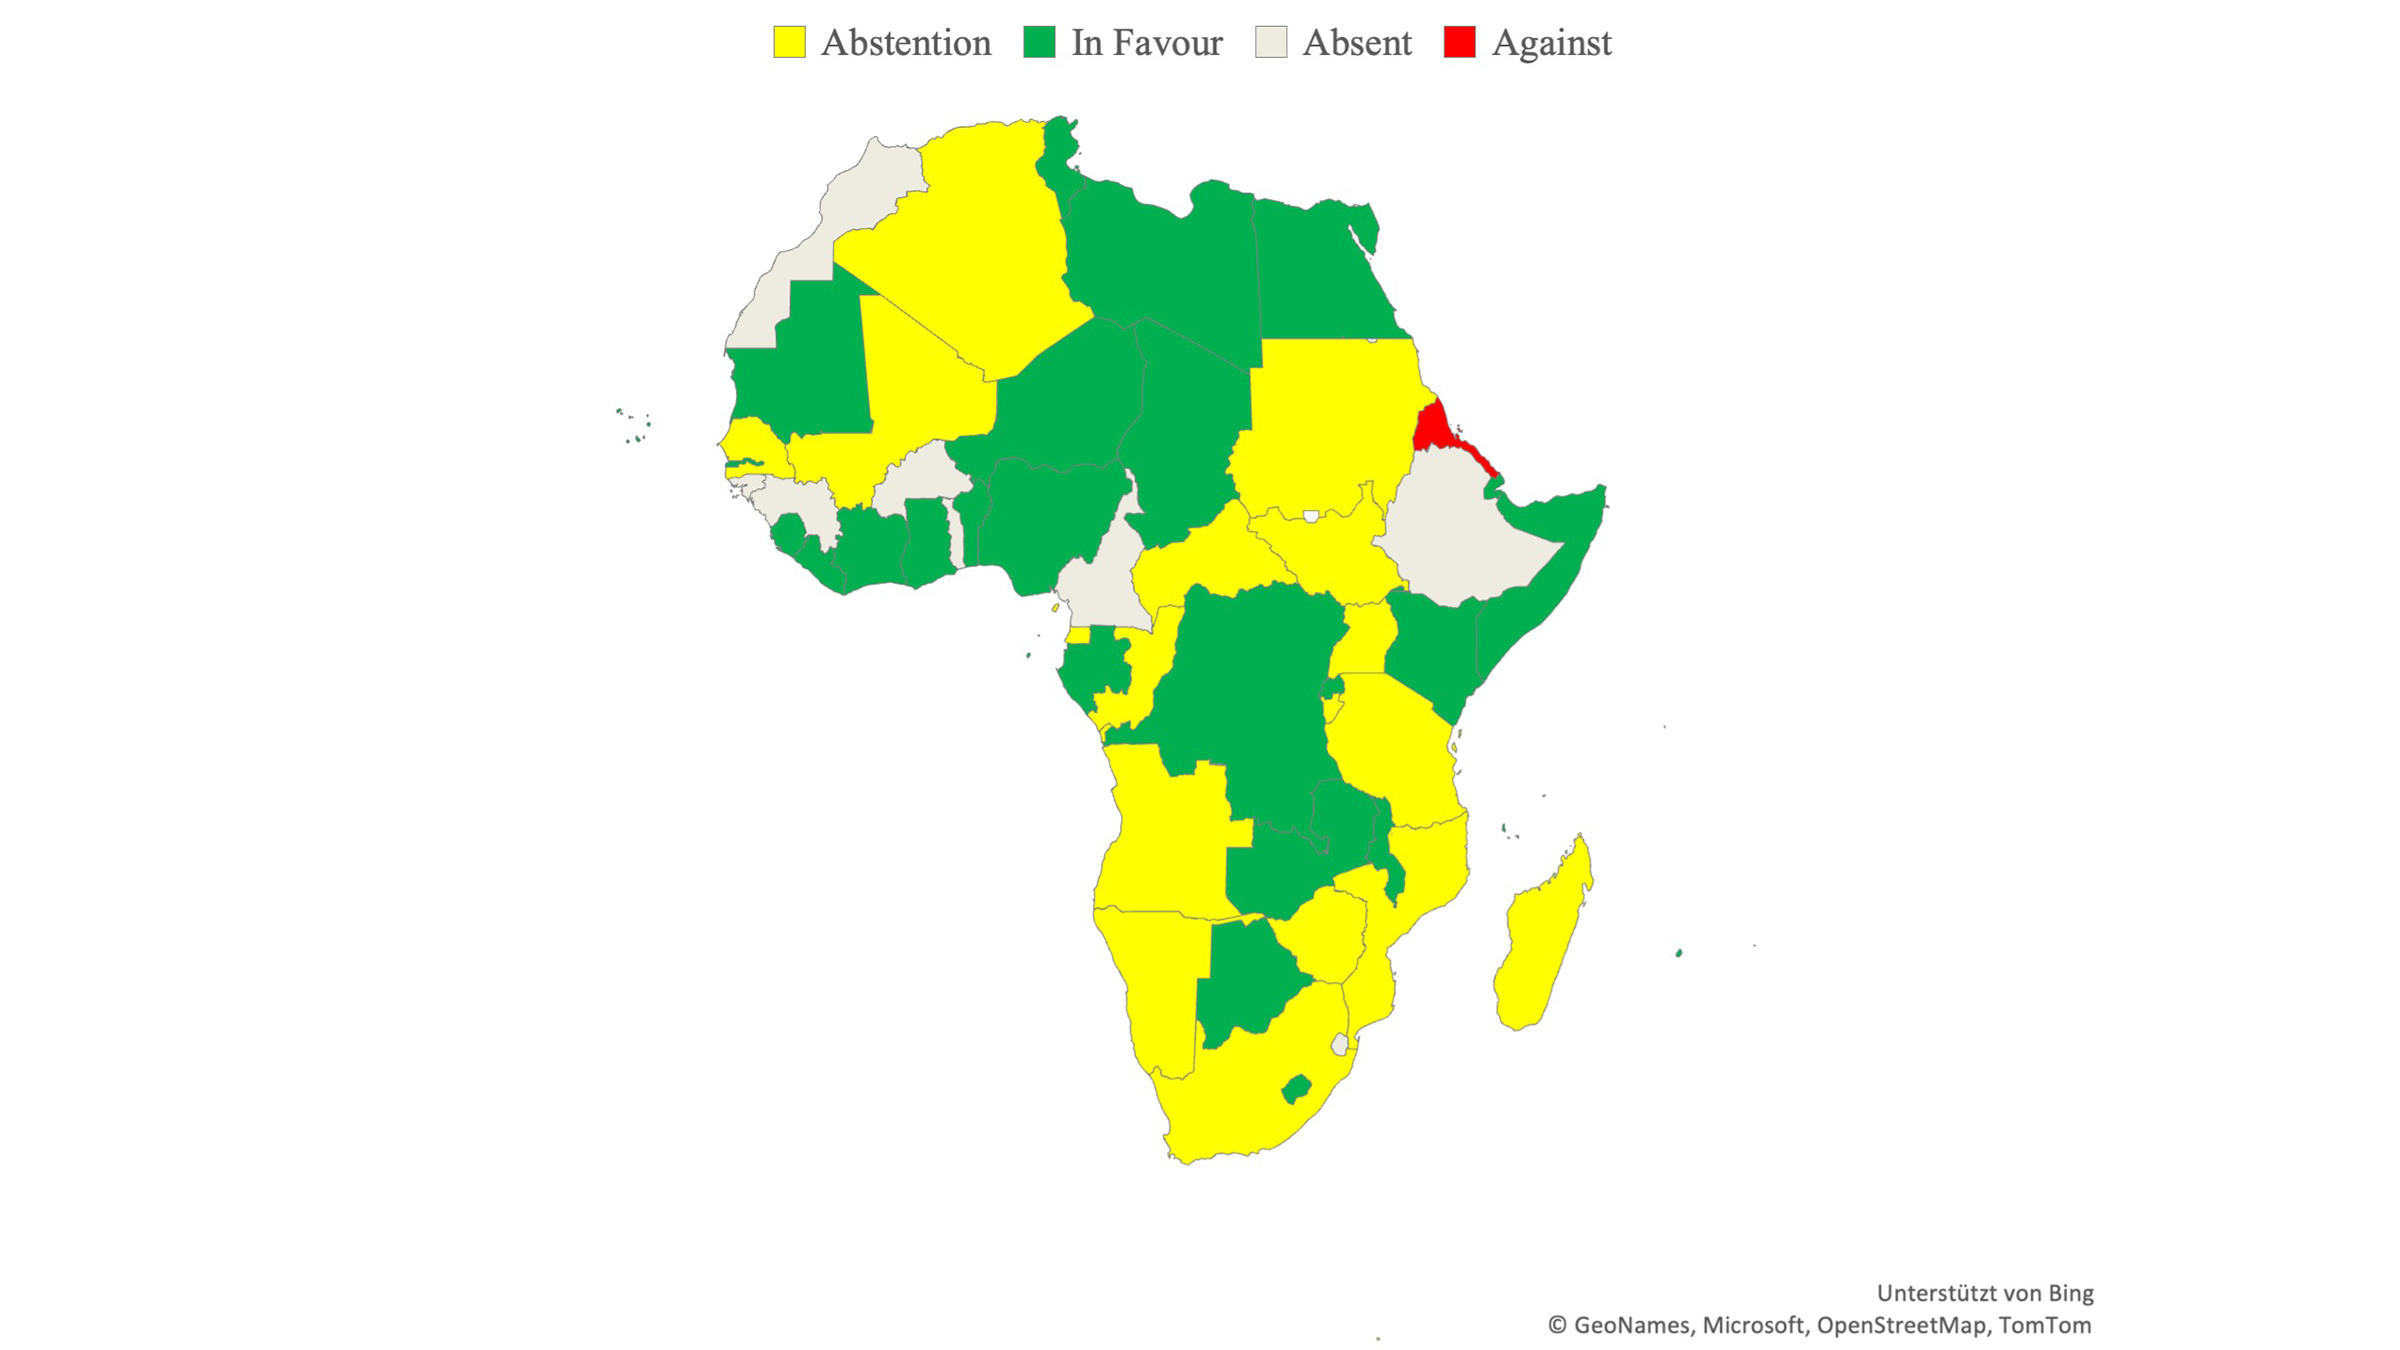 Map showing African States’ Votes on UN Resolution ES-11/1 (“Aggression against Ukraine”), March 2022.